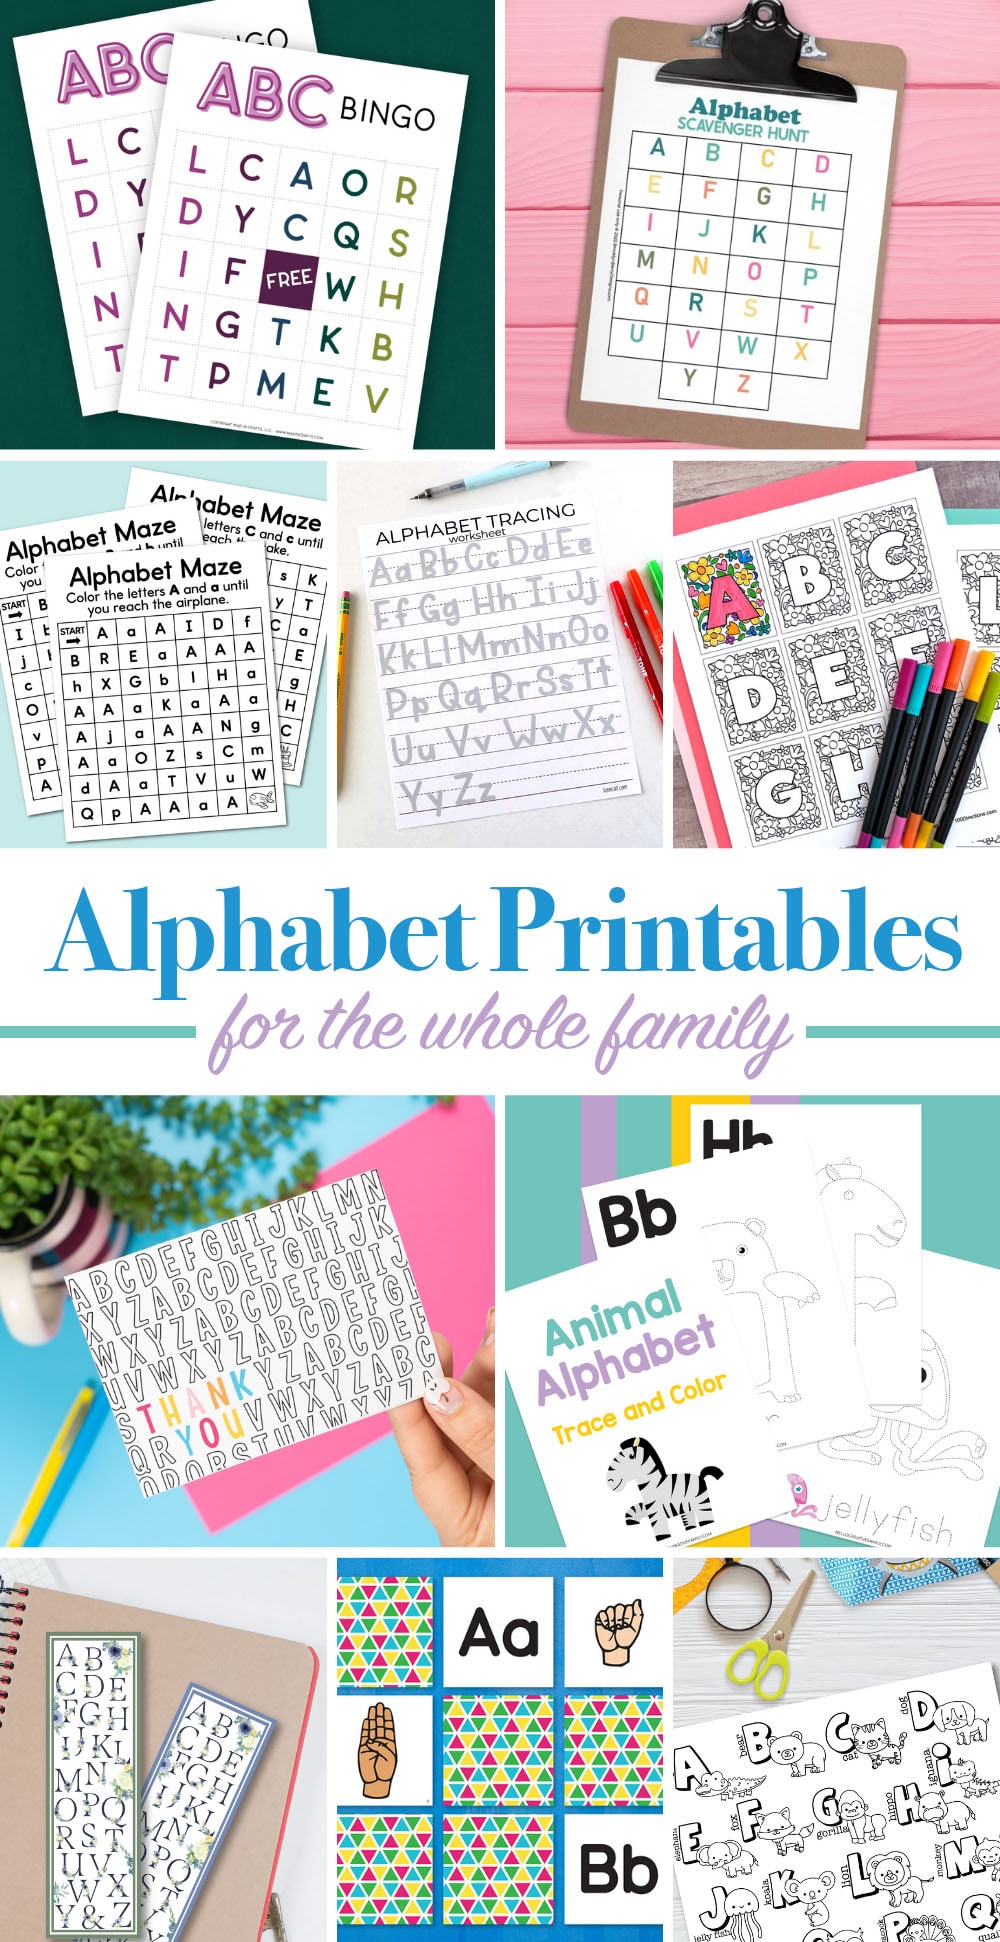 Alphabet printables and activities for the whole family